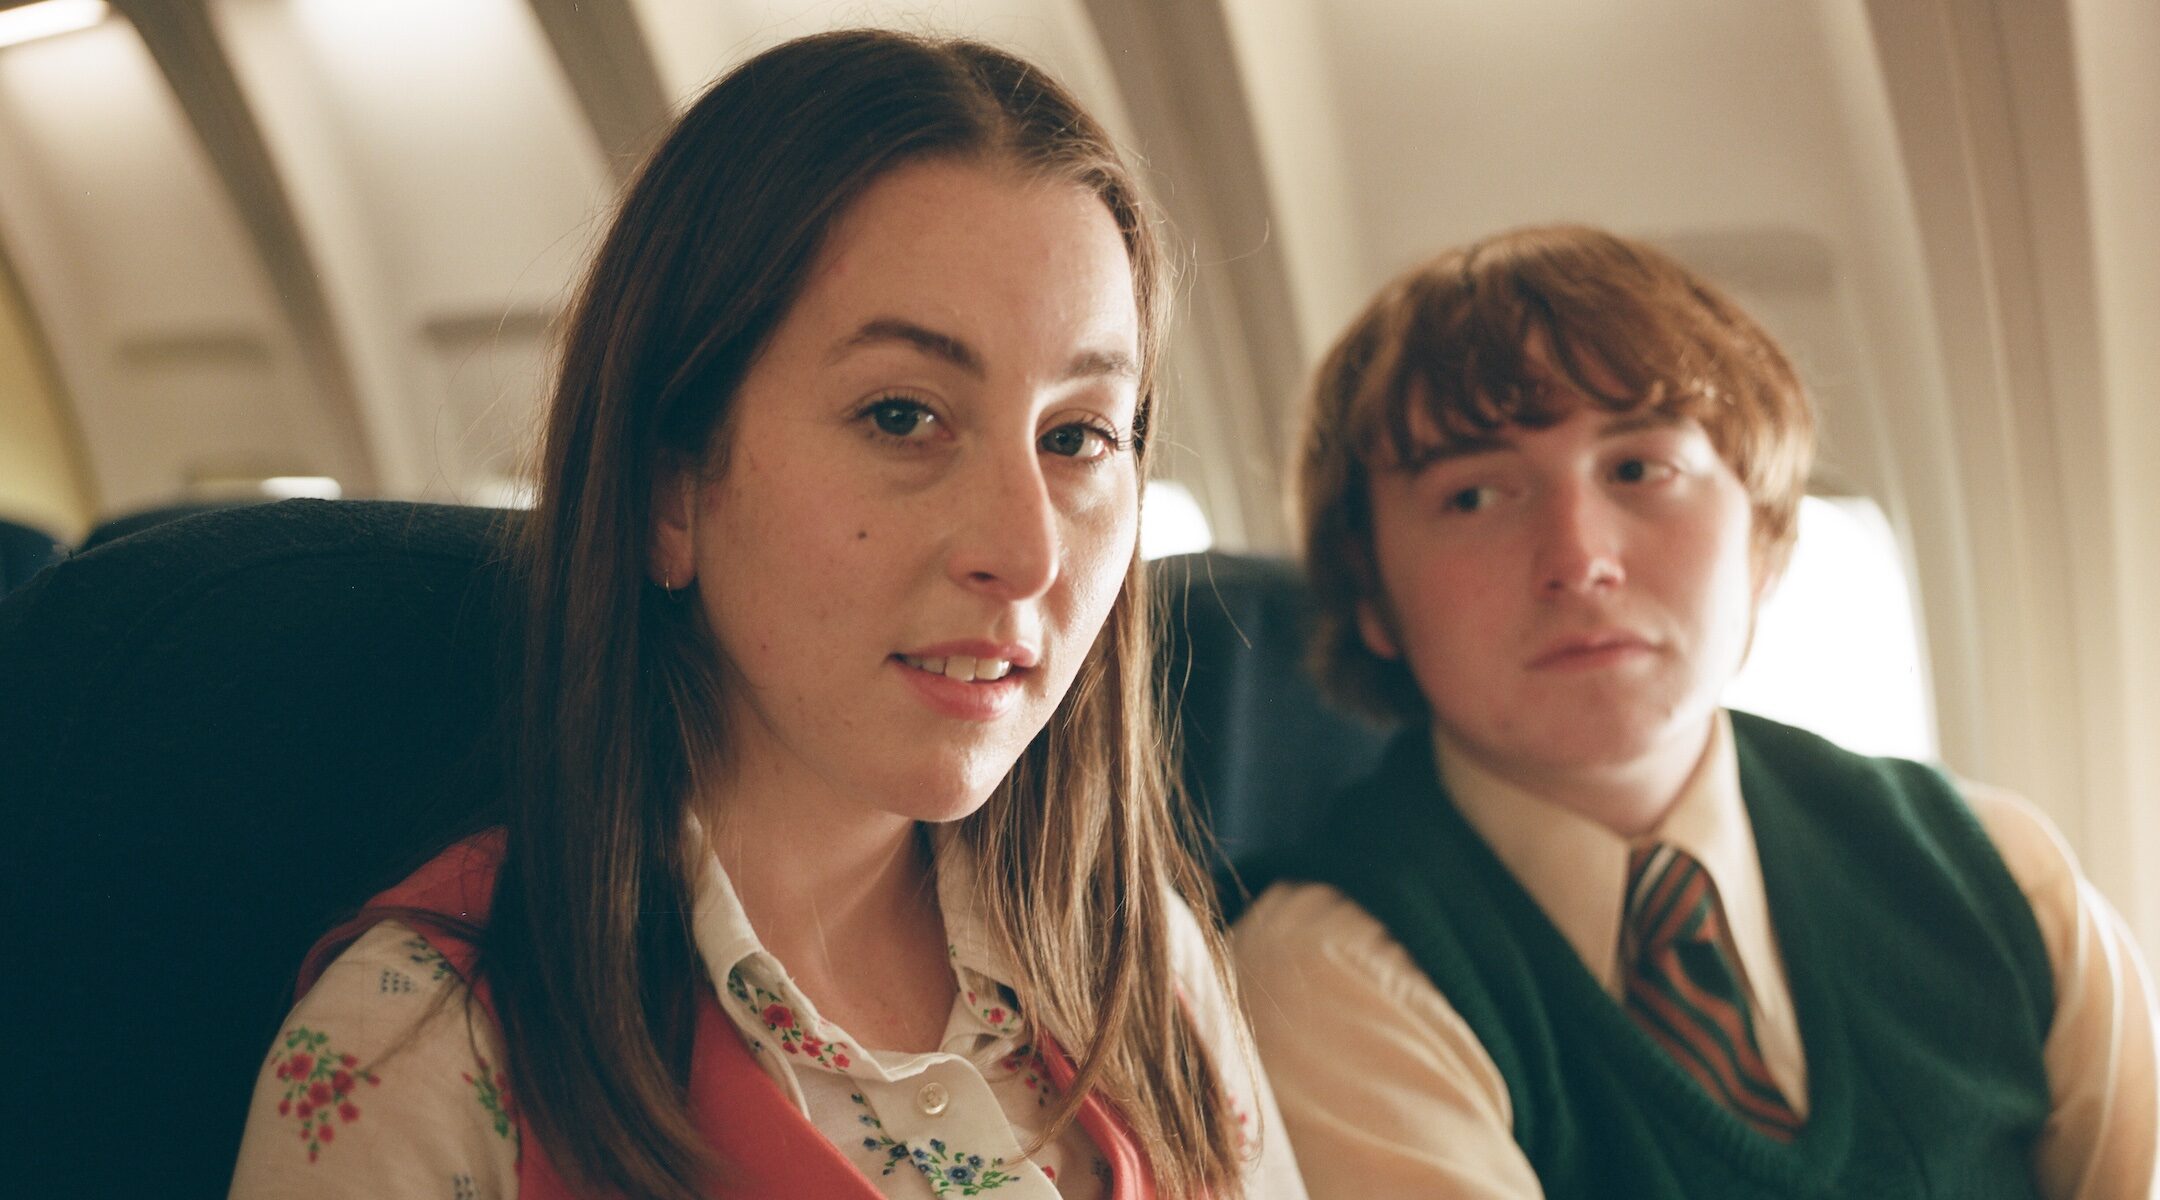 A young women and young man sitting on a plane